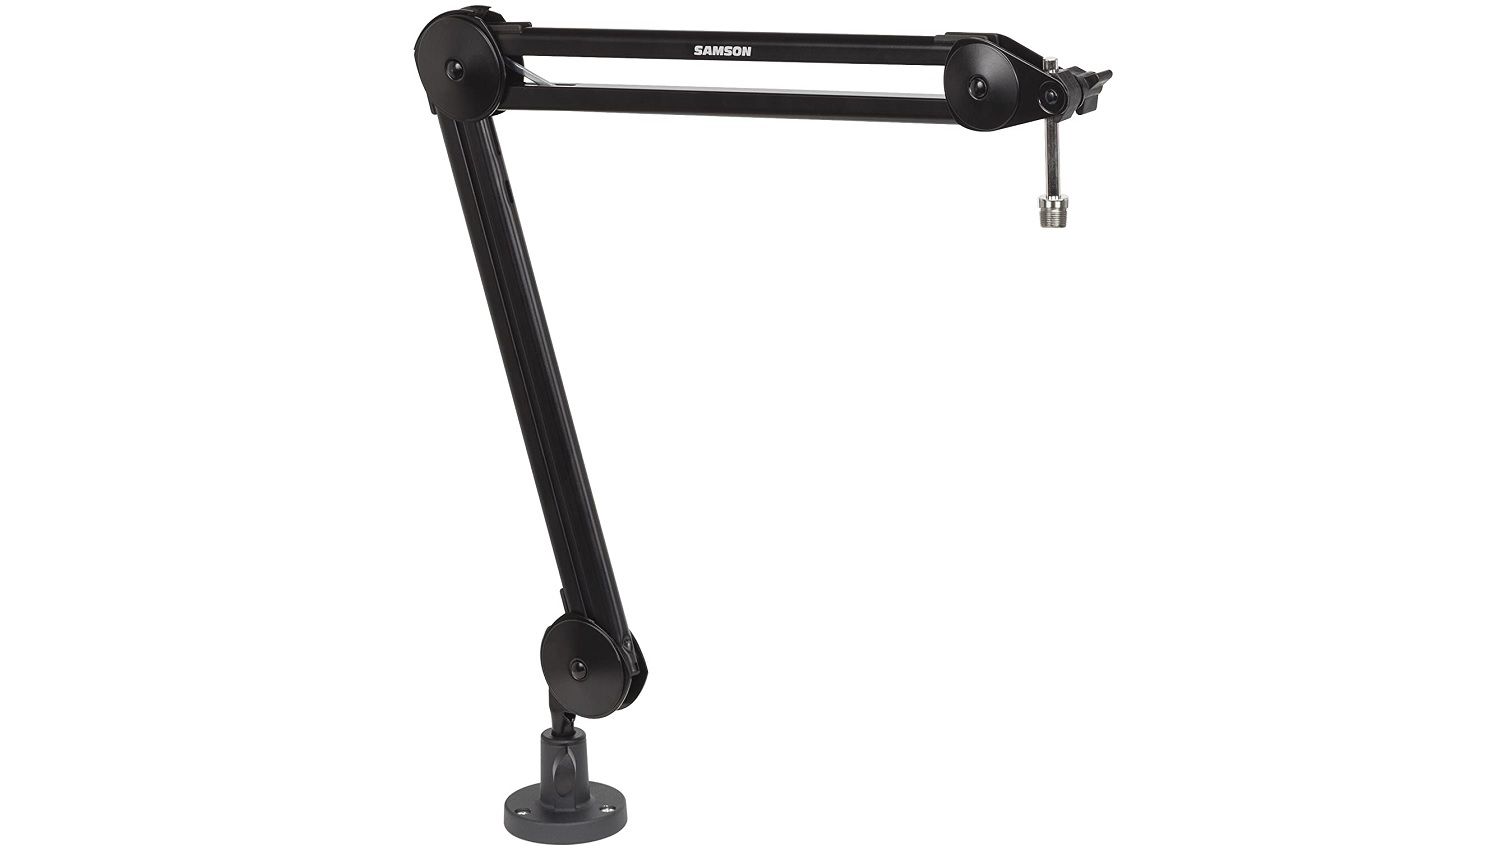 the samson mba38-38, a boom arm for streaming and podcasting